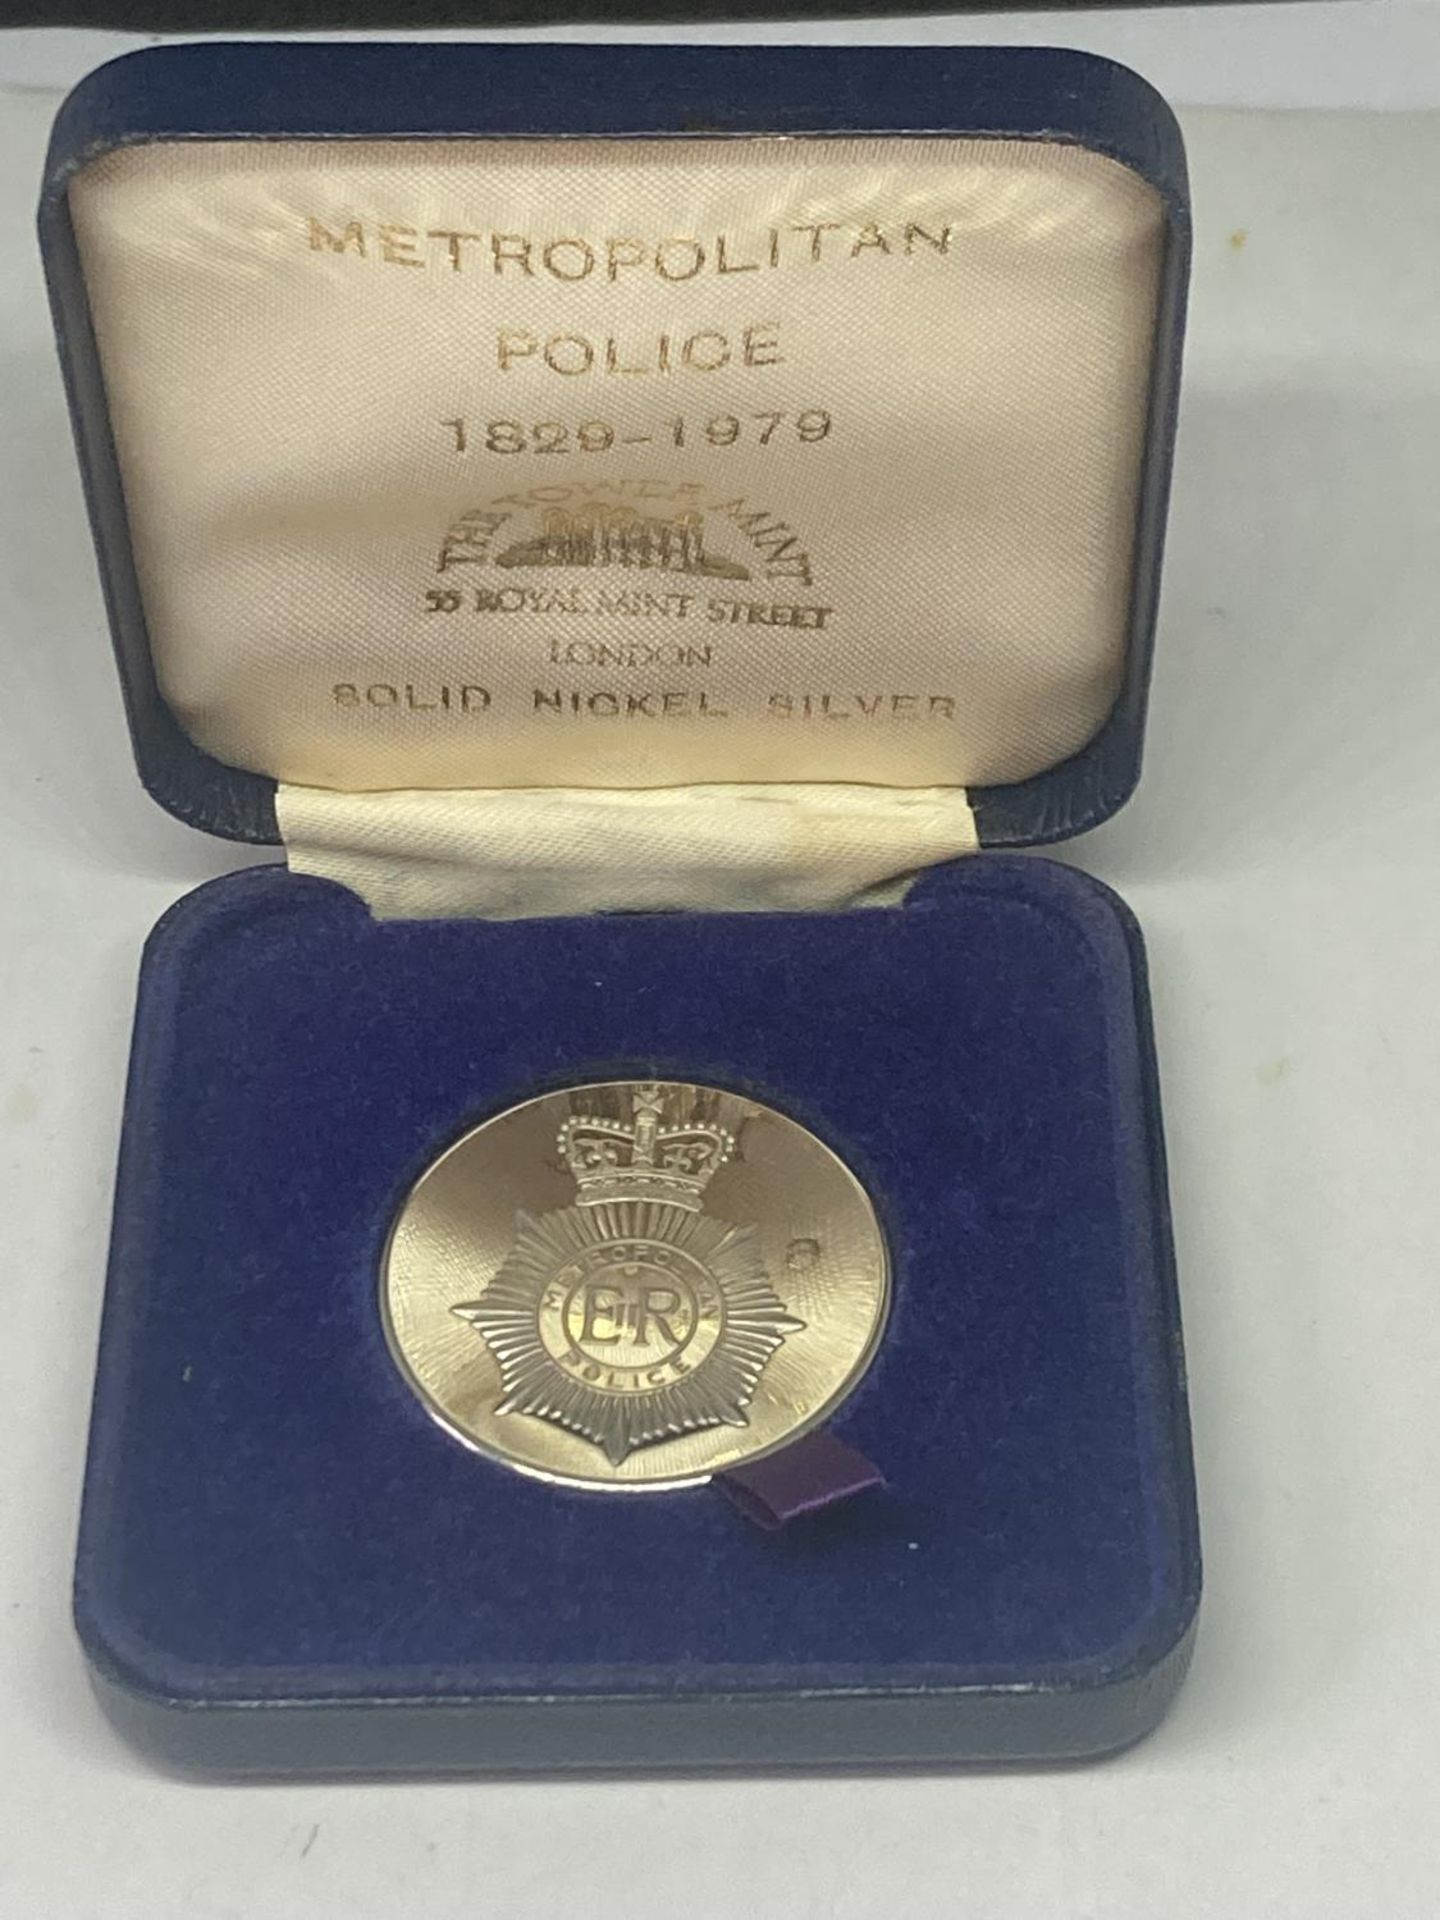 A SILVER TOWER MINT METROPOLITAN POLICE 150TH ANNIVERSARY MEDAL IN A PRESENTATION BOX - Image 2 of 8